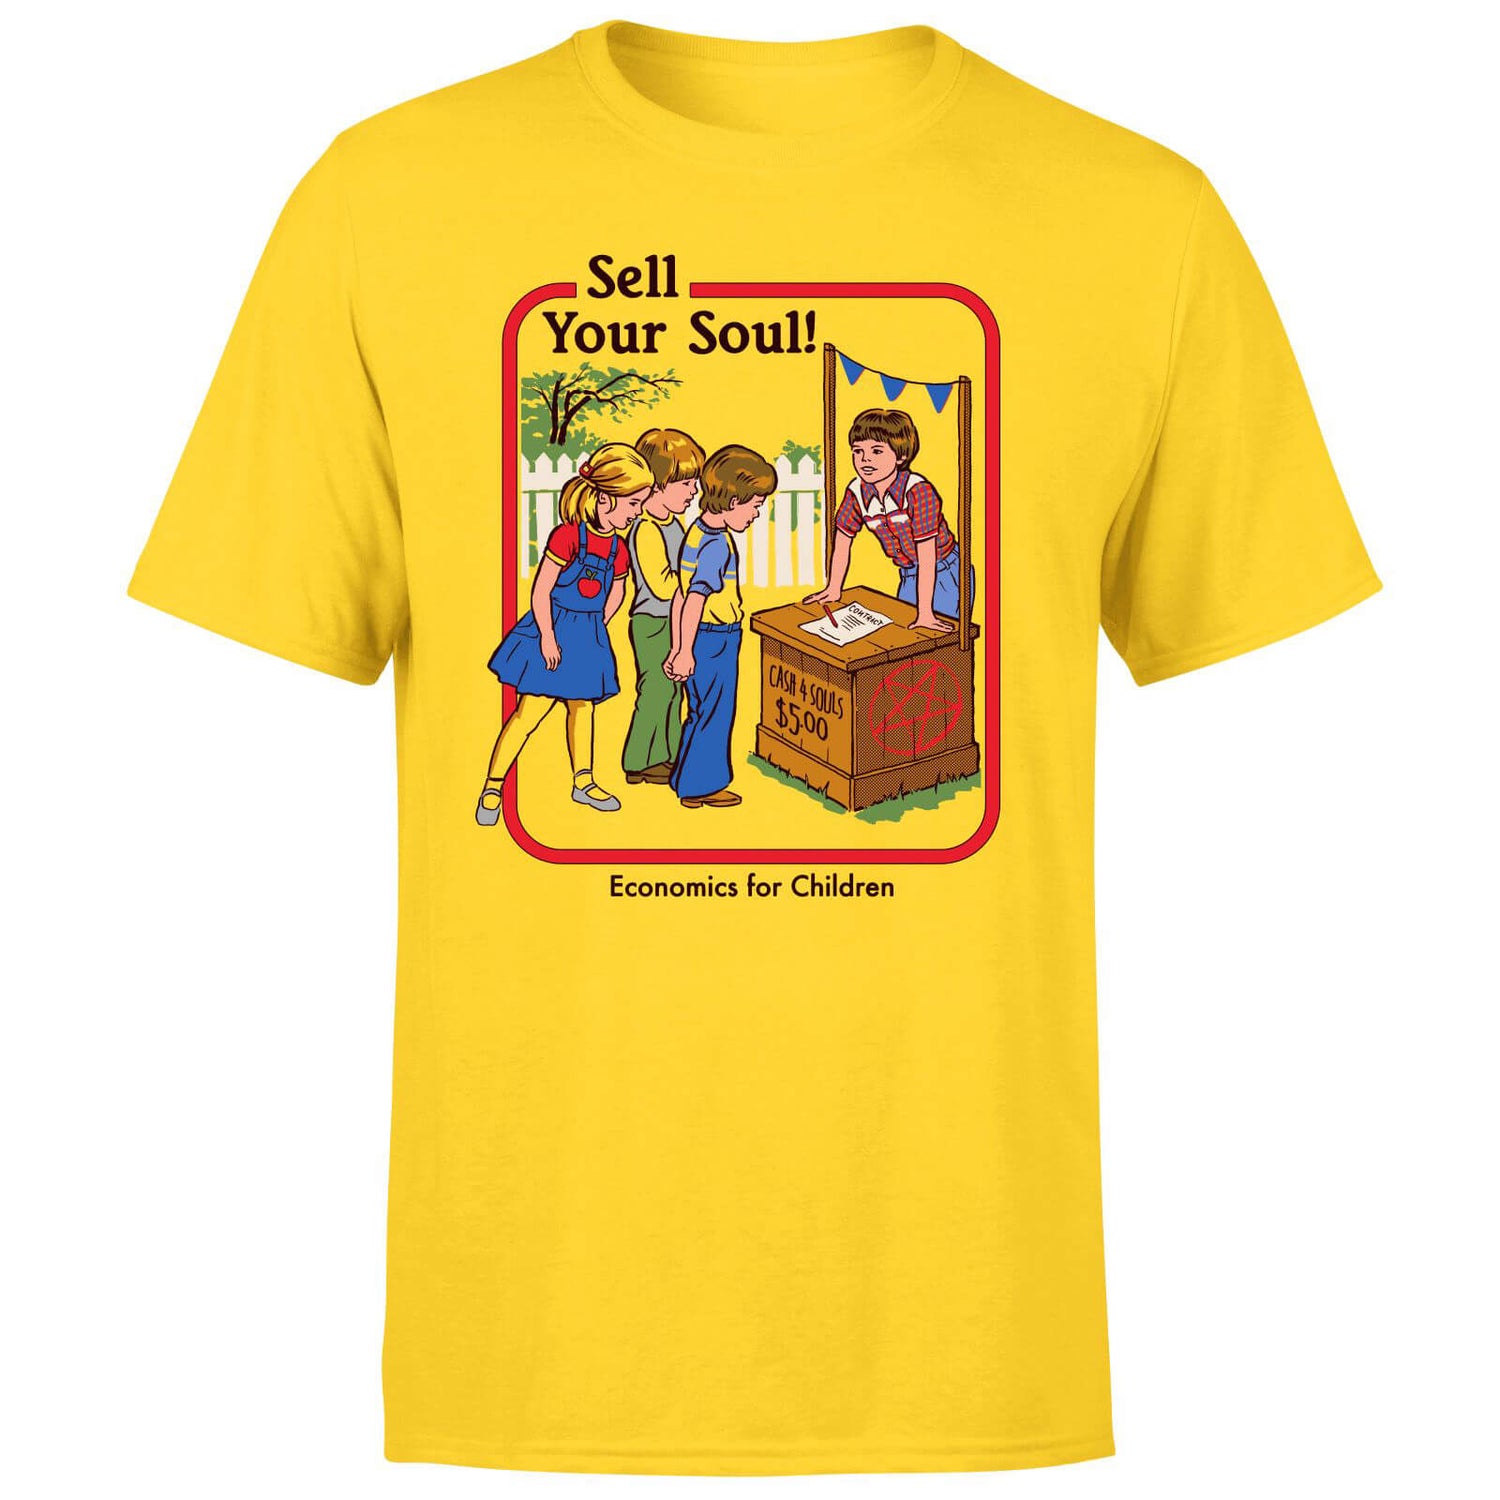 Sell Your Soul Men's T-Shirt - Yellow